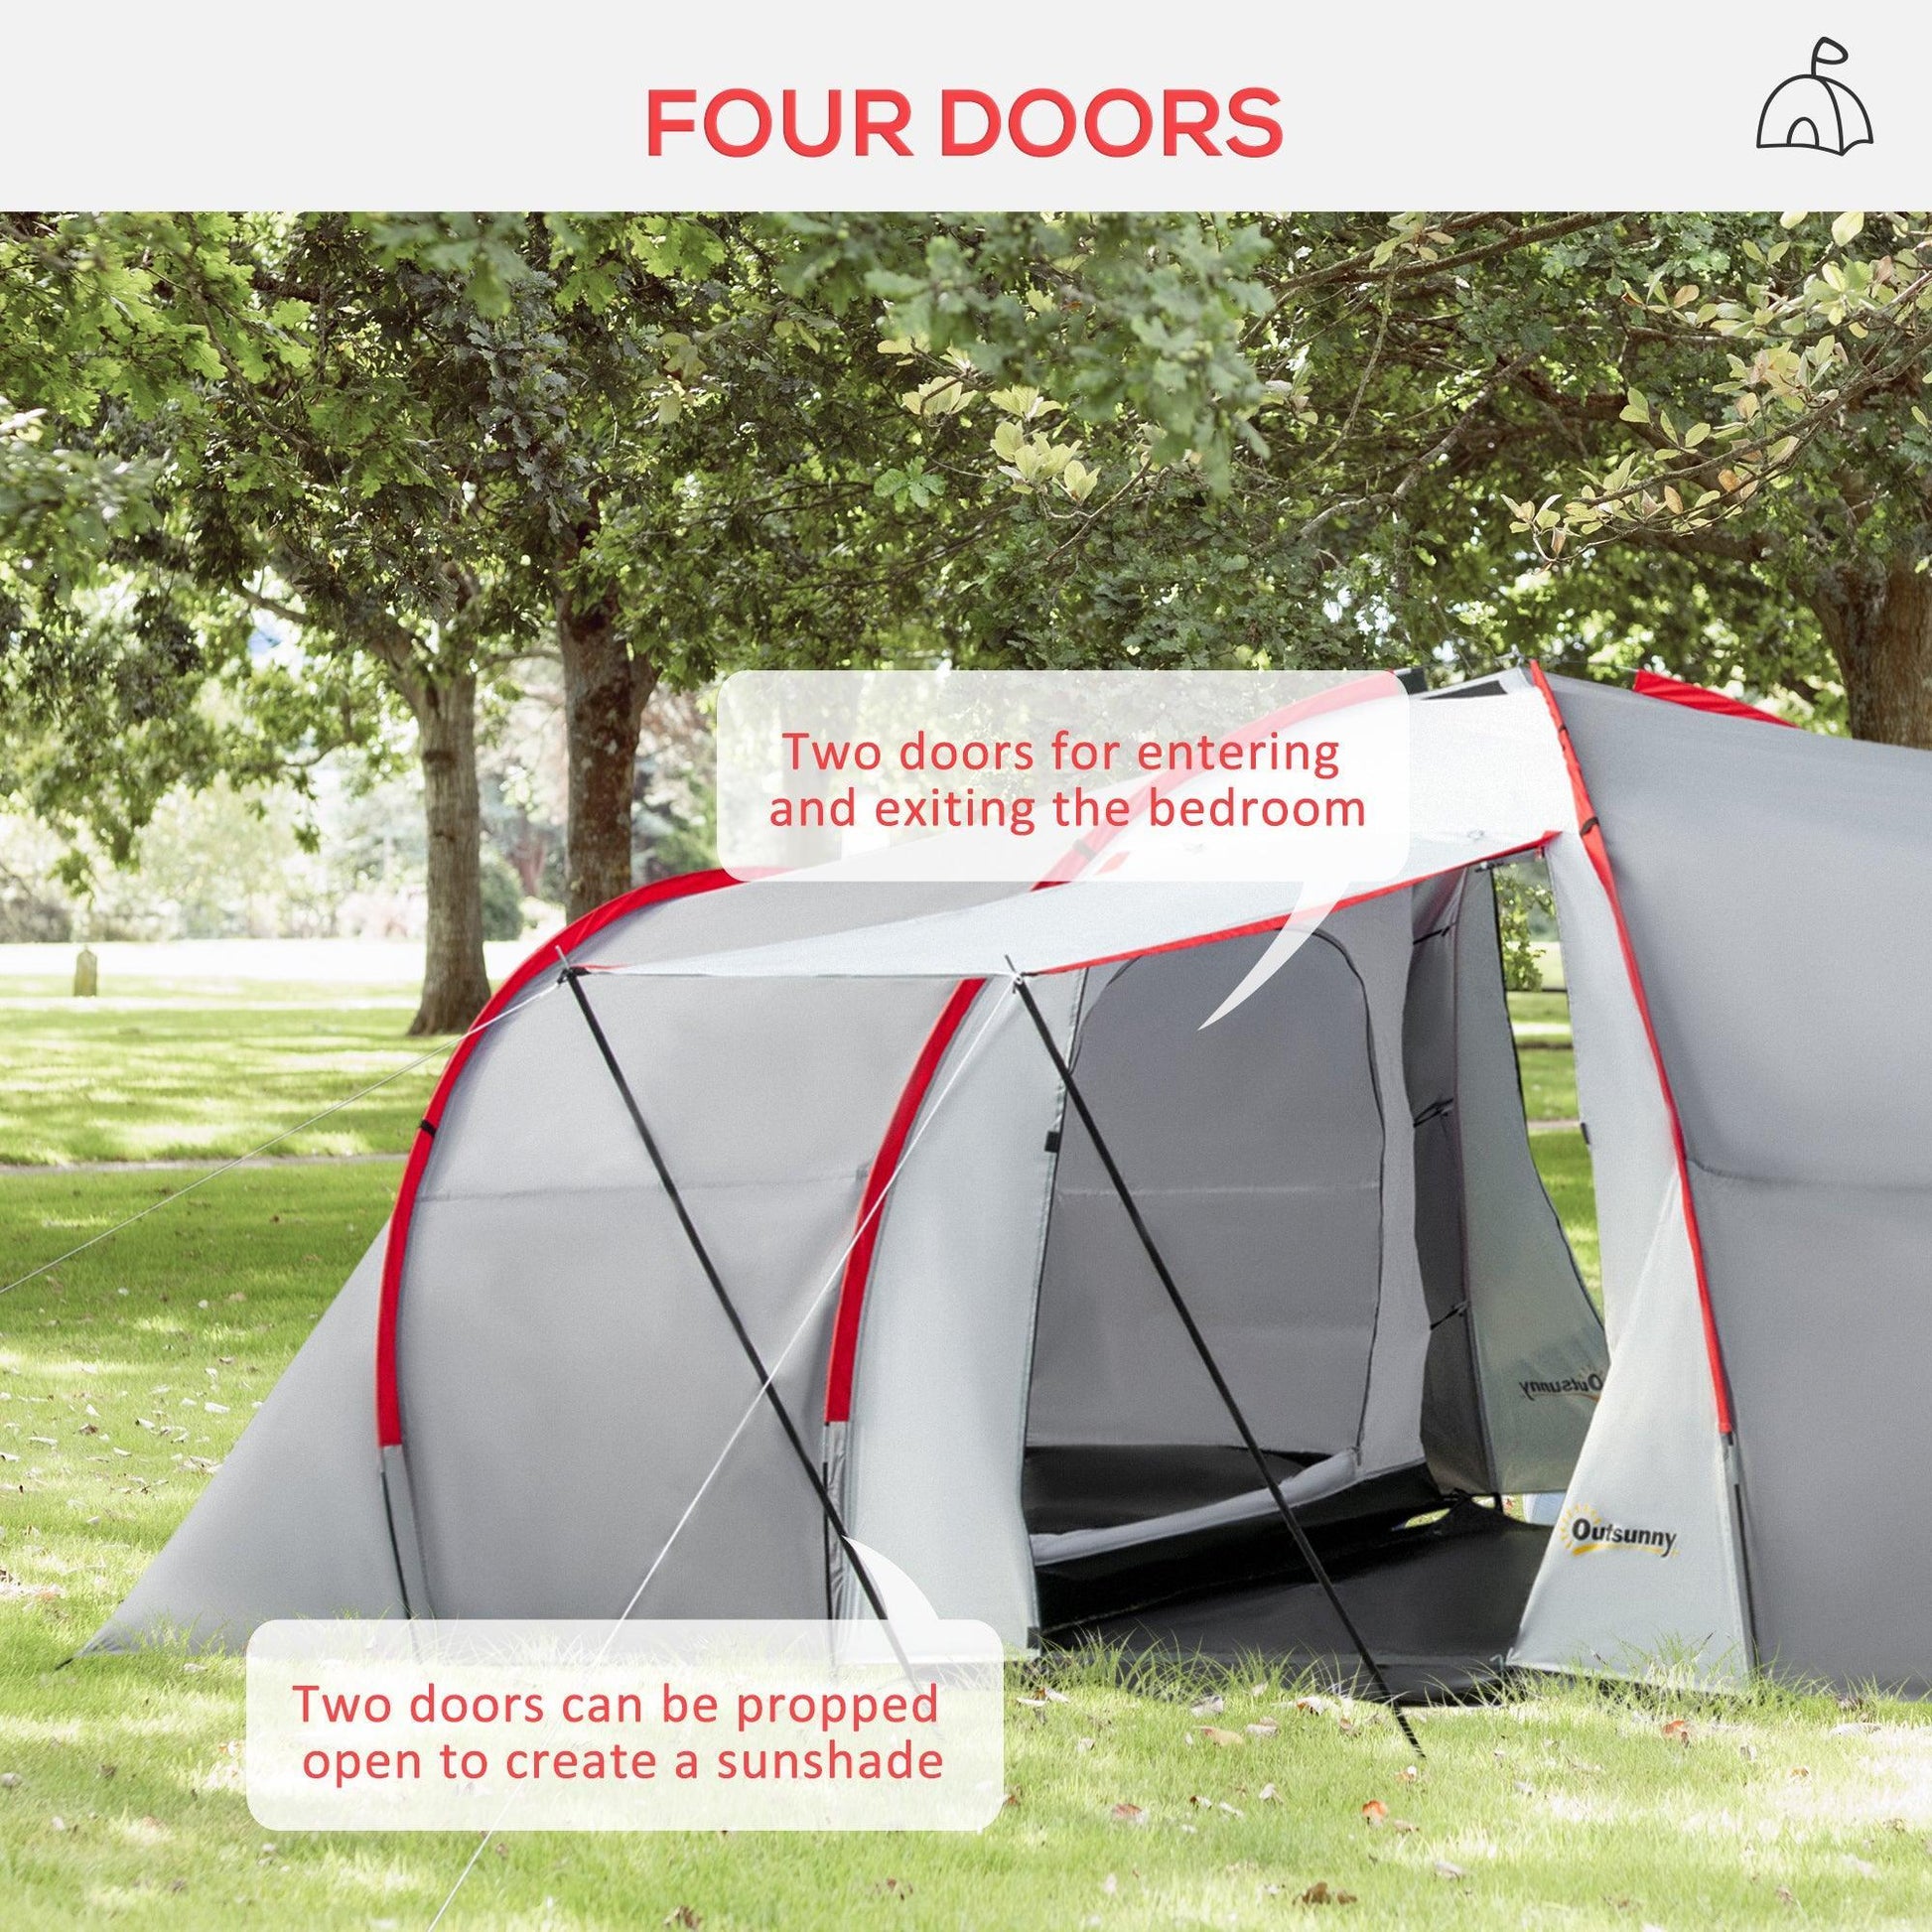 Outsunny Tunnel Tent: Spacious 4-6 Person Camping Shelter - ALL4U RETAILER LTD